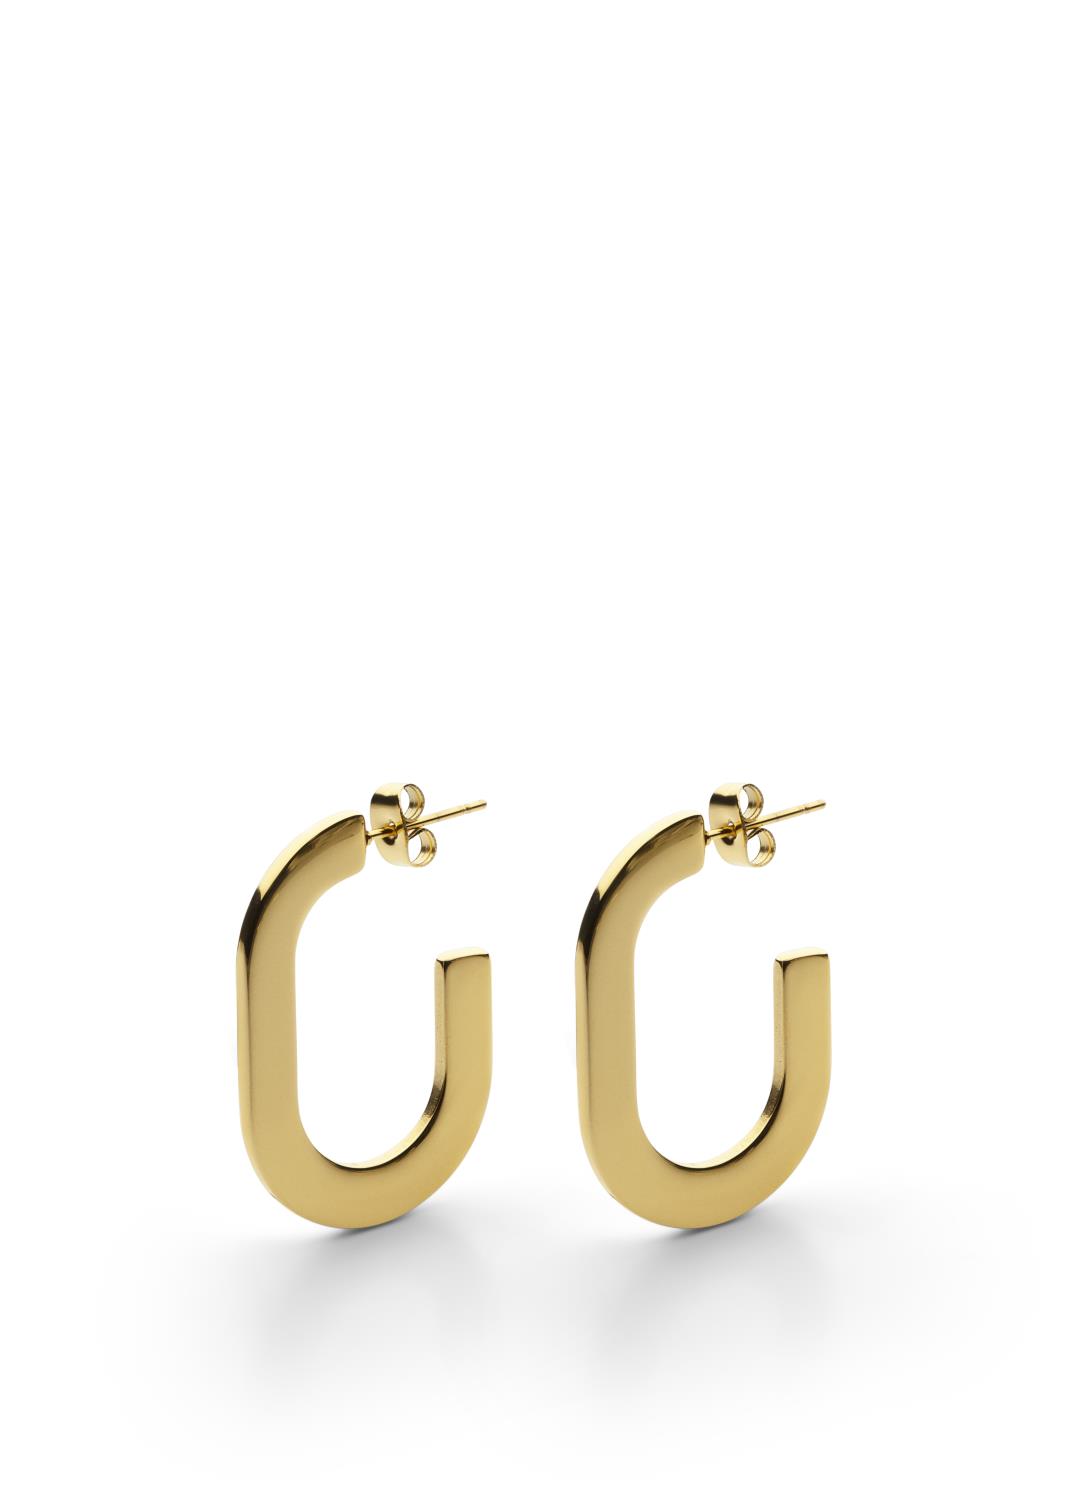 Skultuna - Glam Earring - Small - Gold Plated